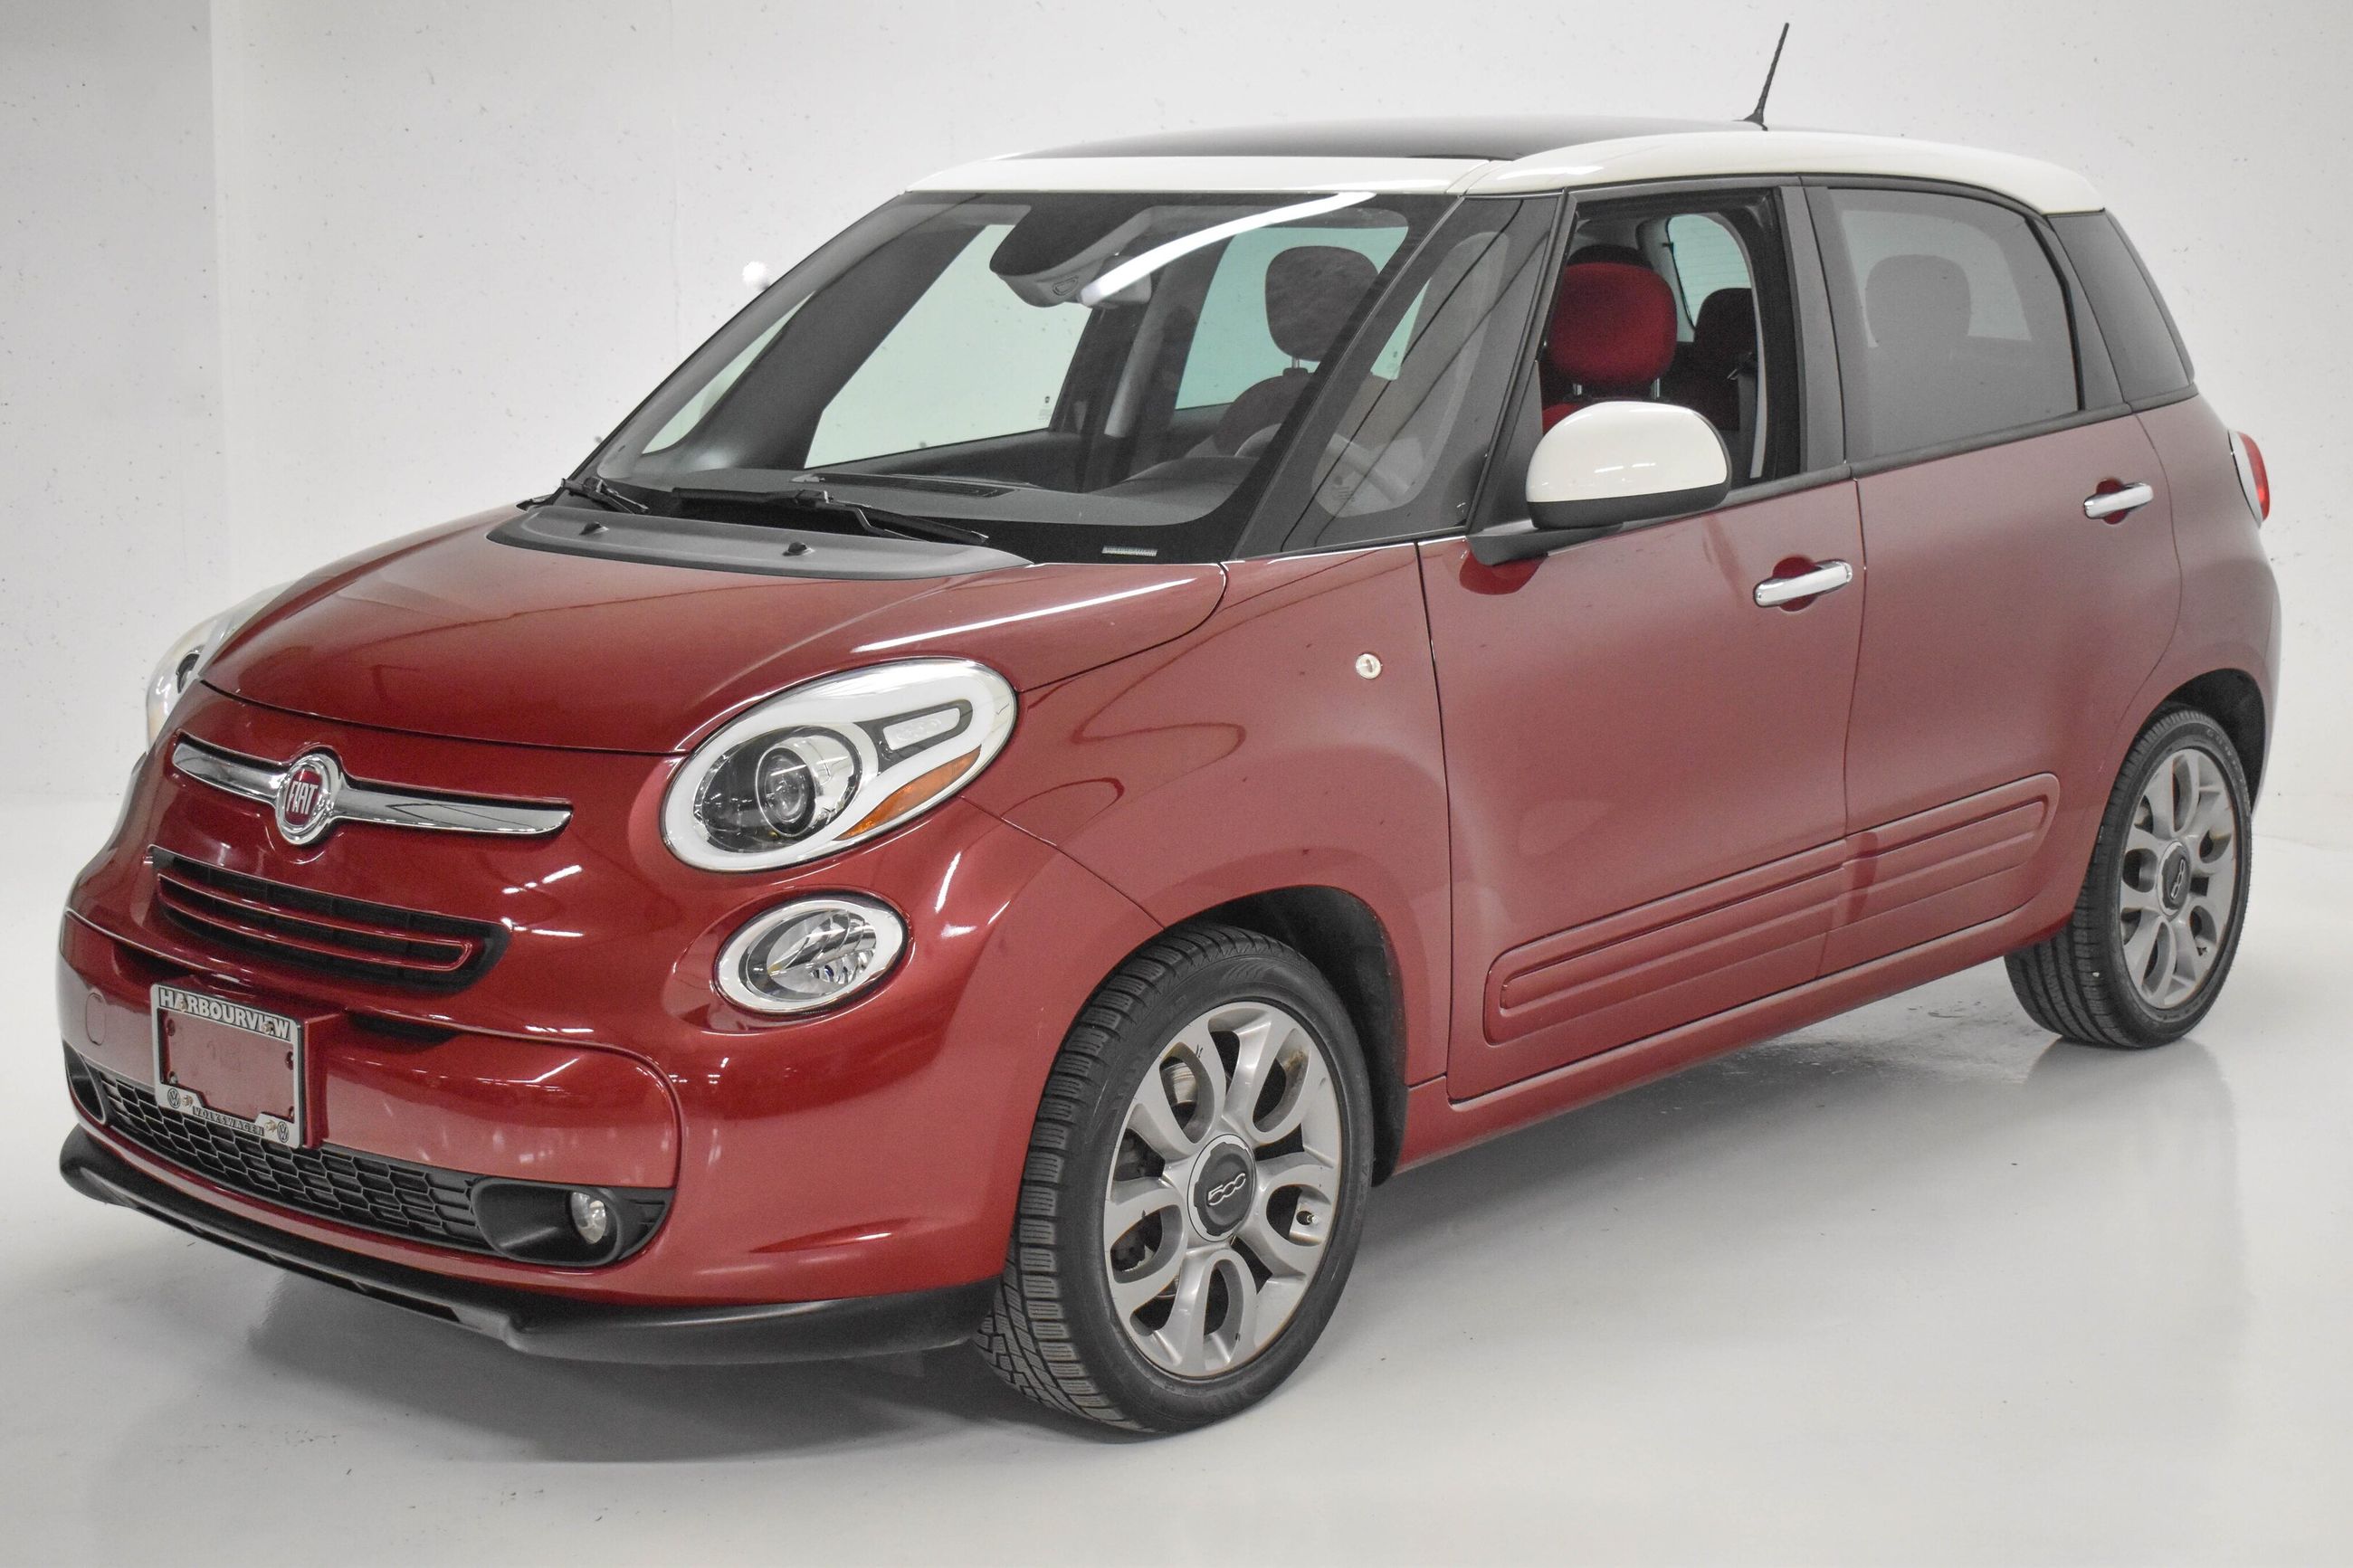 Used 2014 Fiat 500L Sport 6spd for Sale 10994